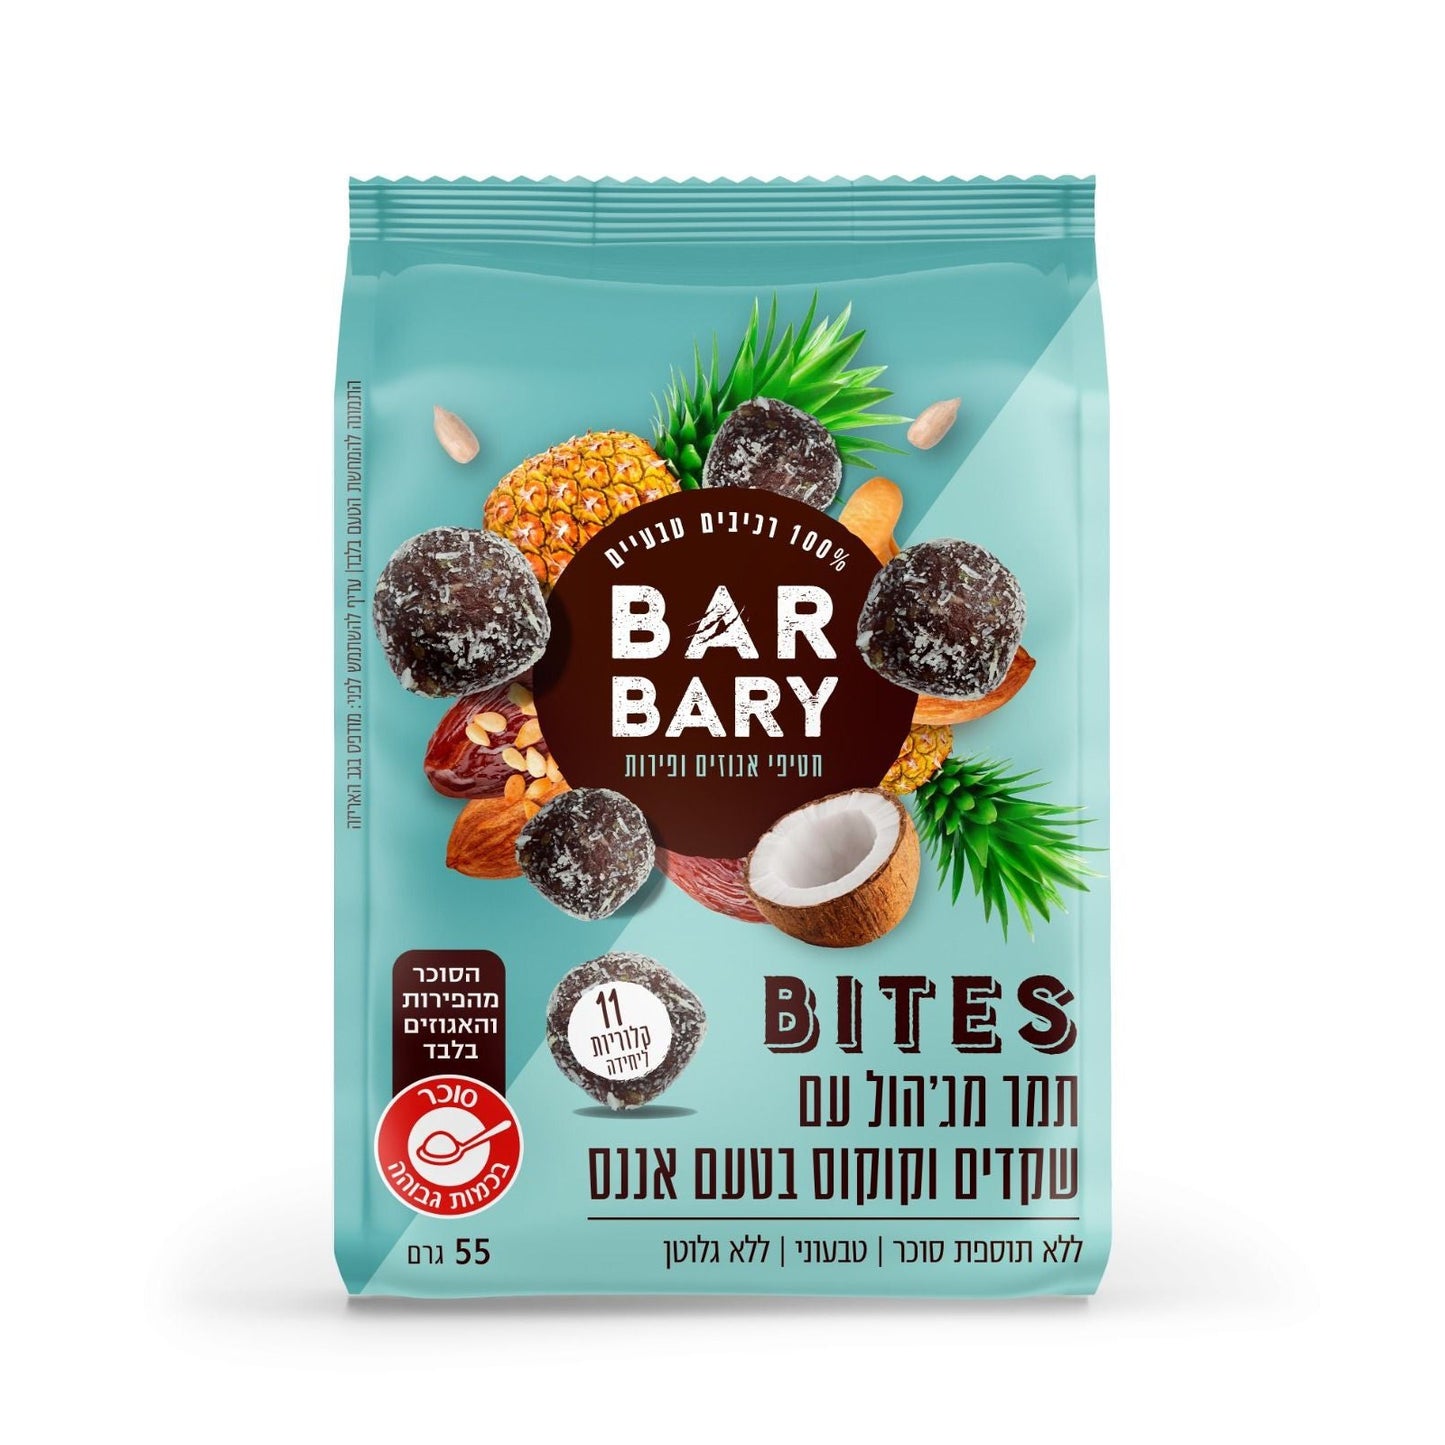 Madjool snacks with almonds and coconut pineapple-flavored - Barbary - Israel Menu